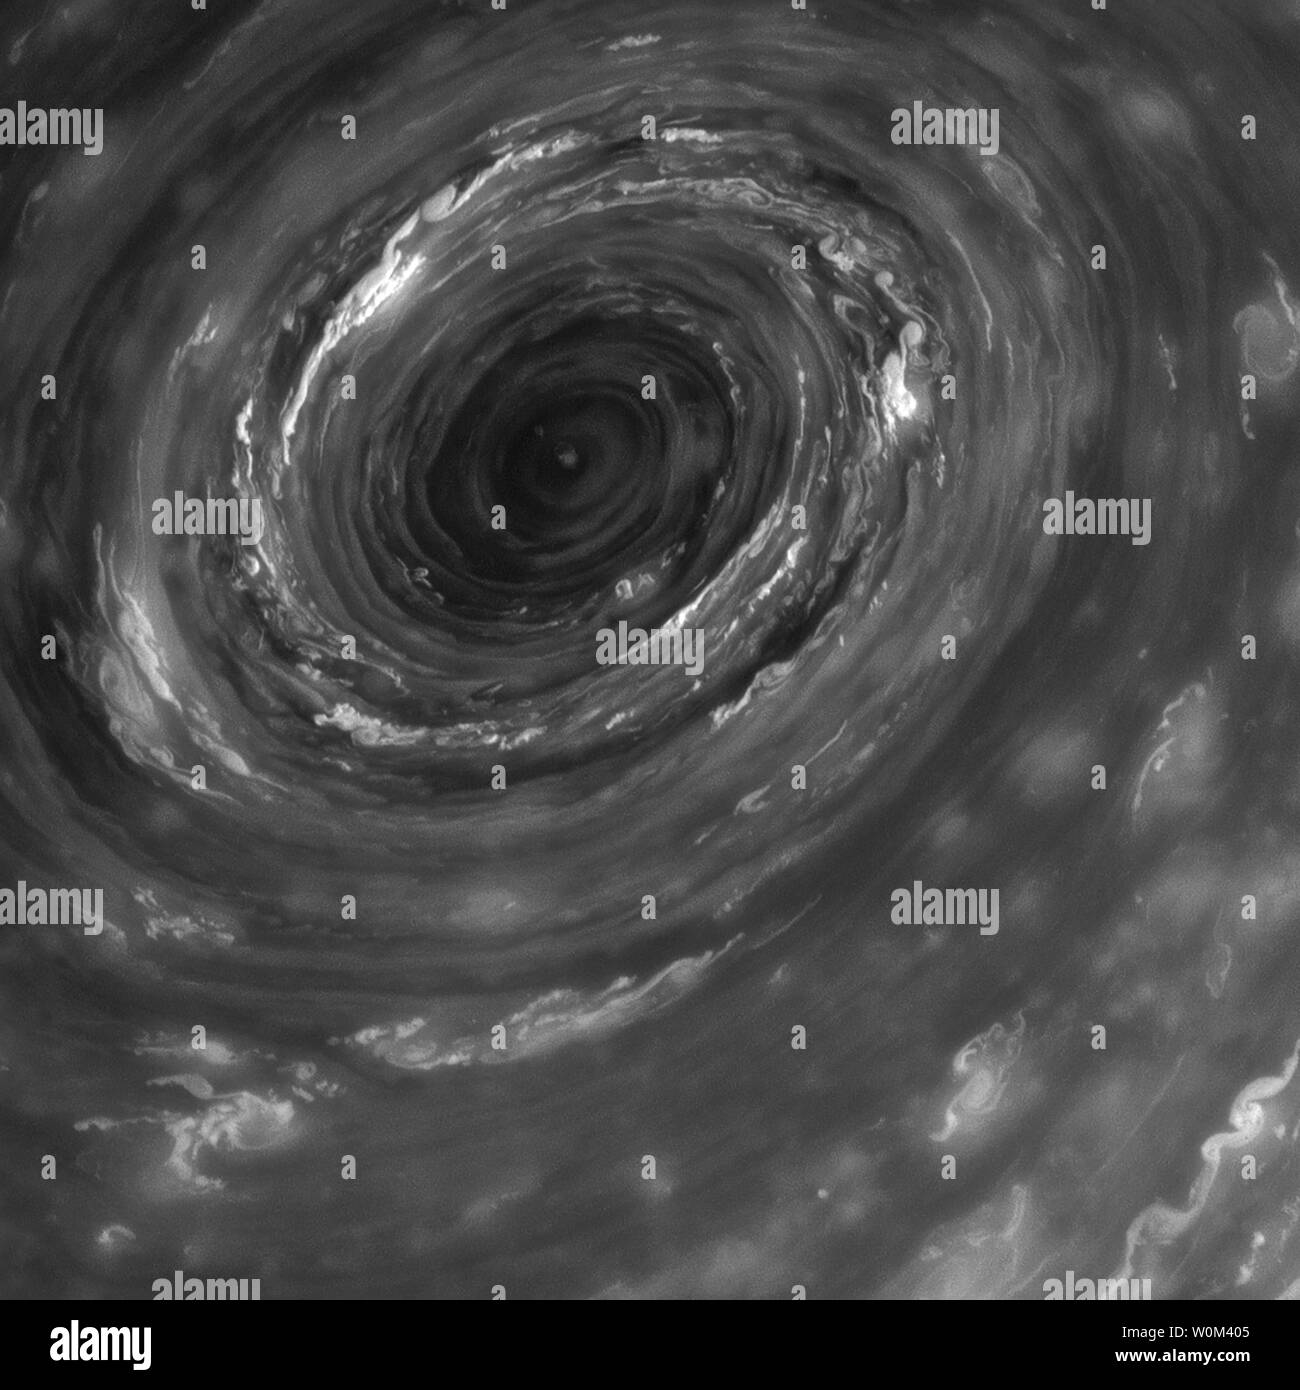 The vortex at Saturn's north pole, seen here in the infrared, is the eye of an immense cyclone, about 2,000 kilometers (1,250 miles) wide, 20 times larger than most on Earth. The image was taken with the Cassini spacecraft narrow-angle camera on June 14, 2013, using a spectral filter sensitive to wavelengths of near-infrared light centered at 750 nanometers. On September 15, 2017, after two decades in space, NASA's Cassini spacecraft made its final approach to Saturn, diving into the planet's atmosphere. Since its arrival in 2004, the Cassini-Huygens mission has been a discovery machine, revol Stock Photo